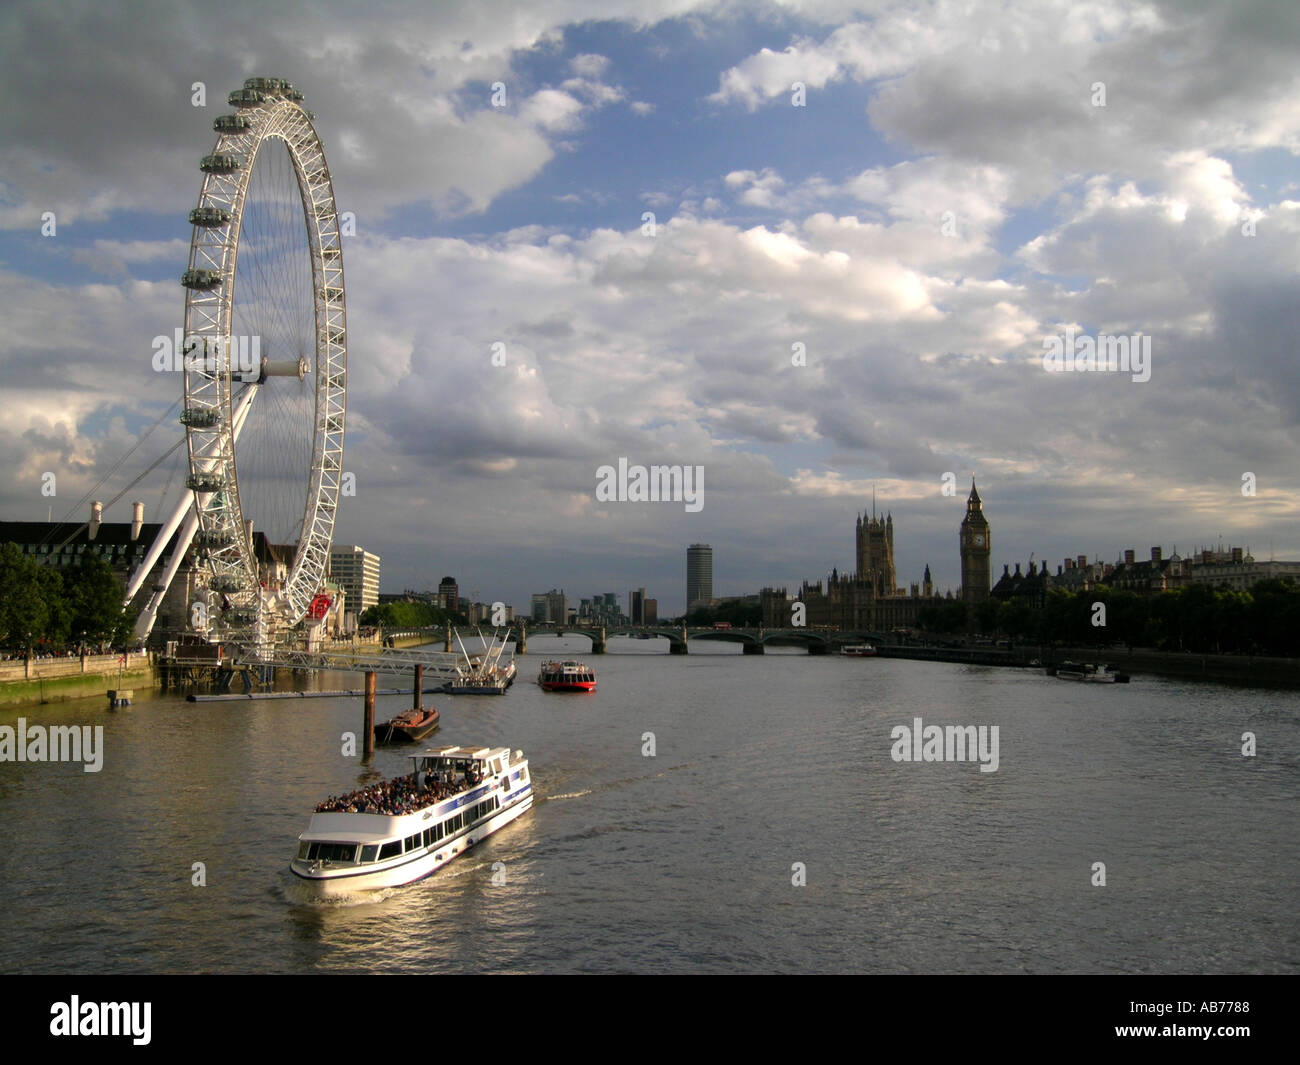 day The London Eye millenium ferris wheel and River Thames Boat London england britain UK Stock Photo